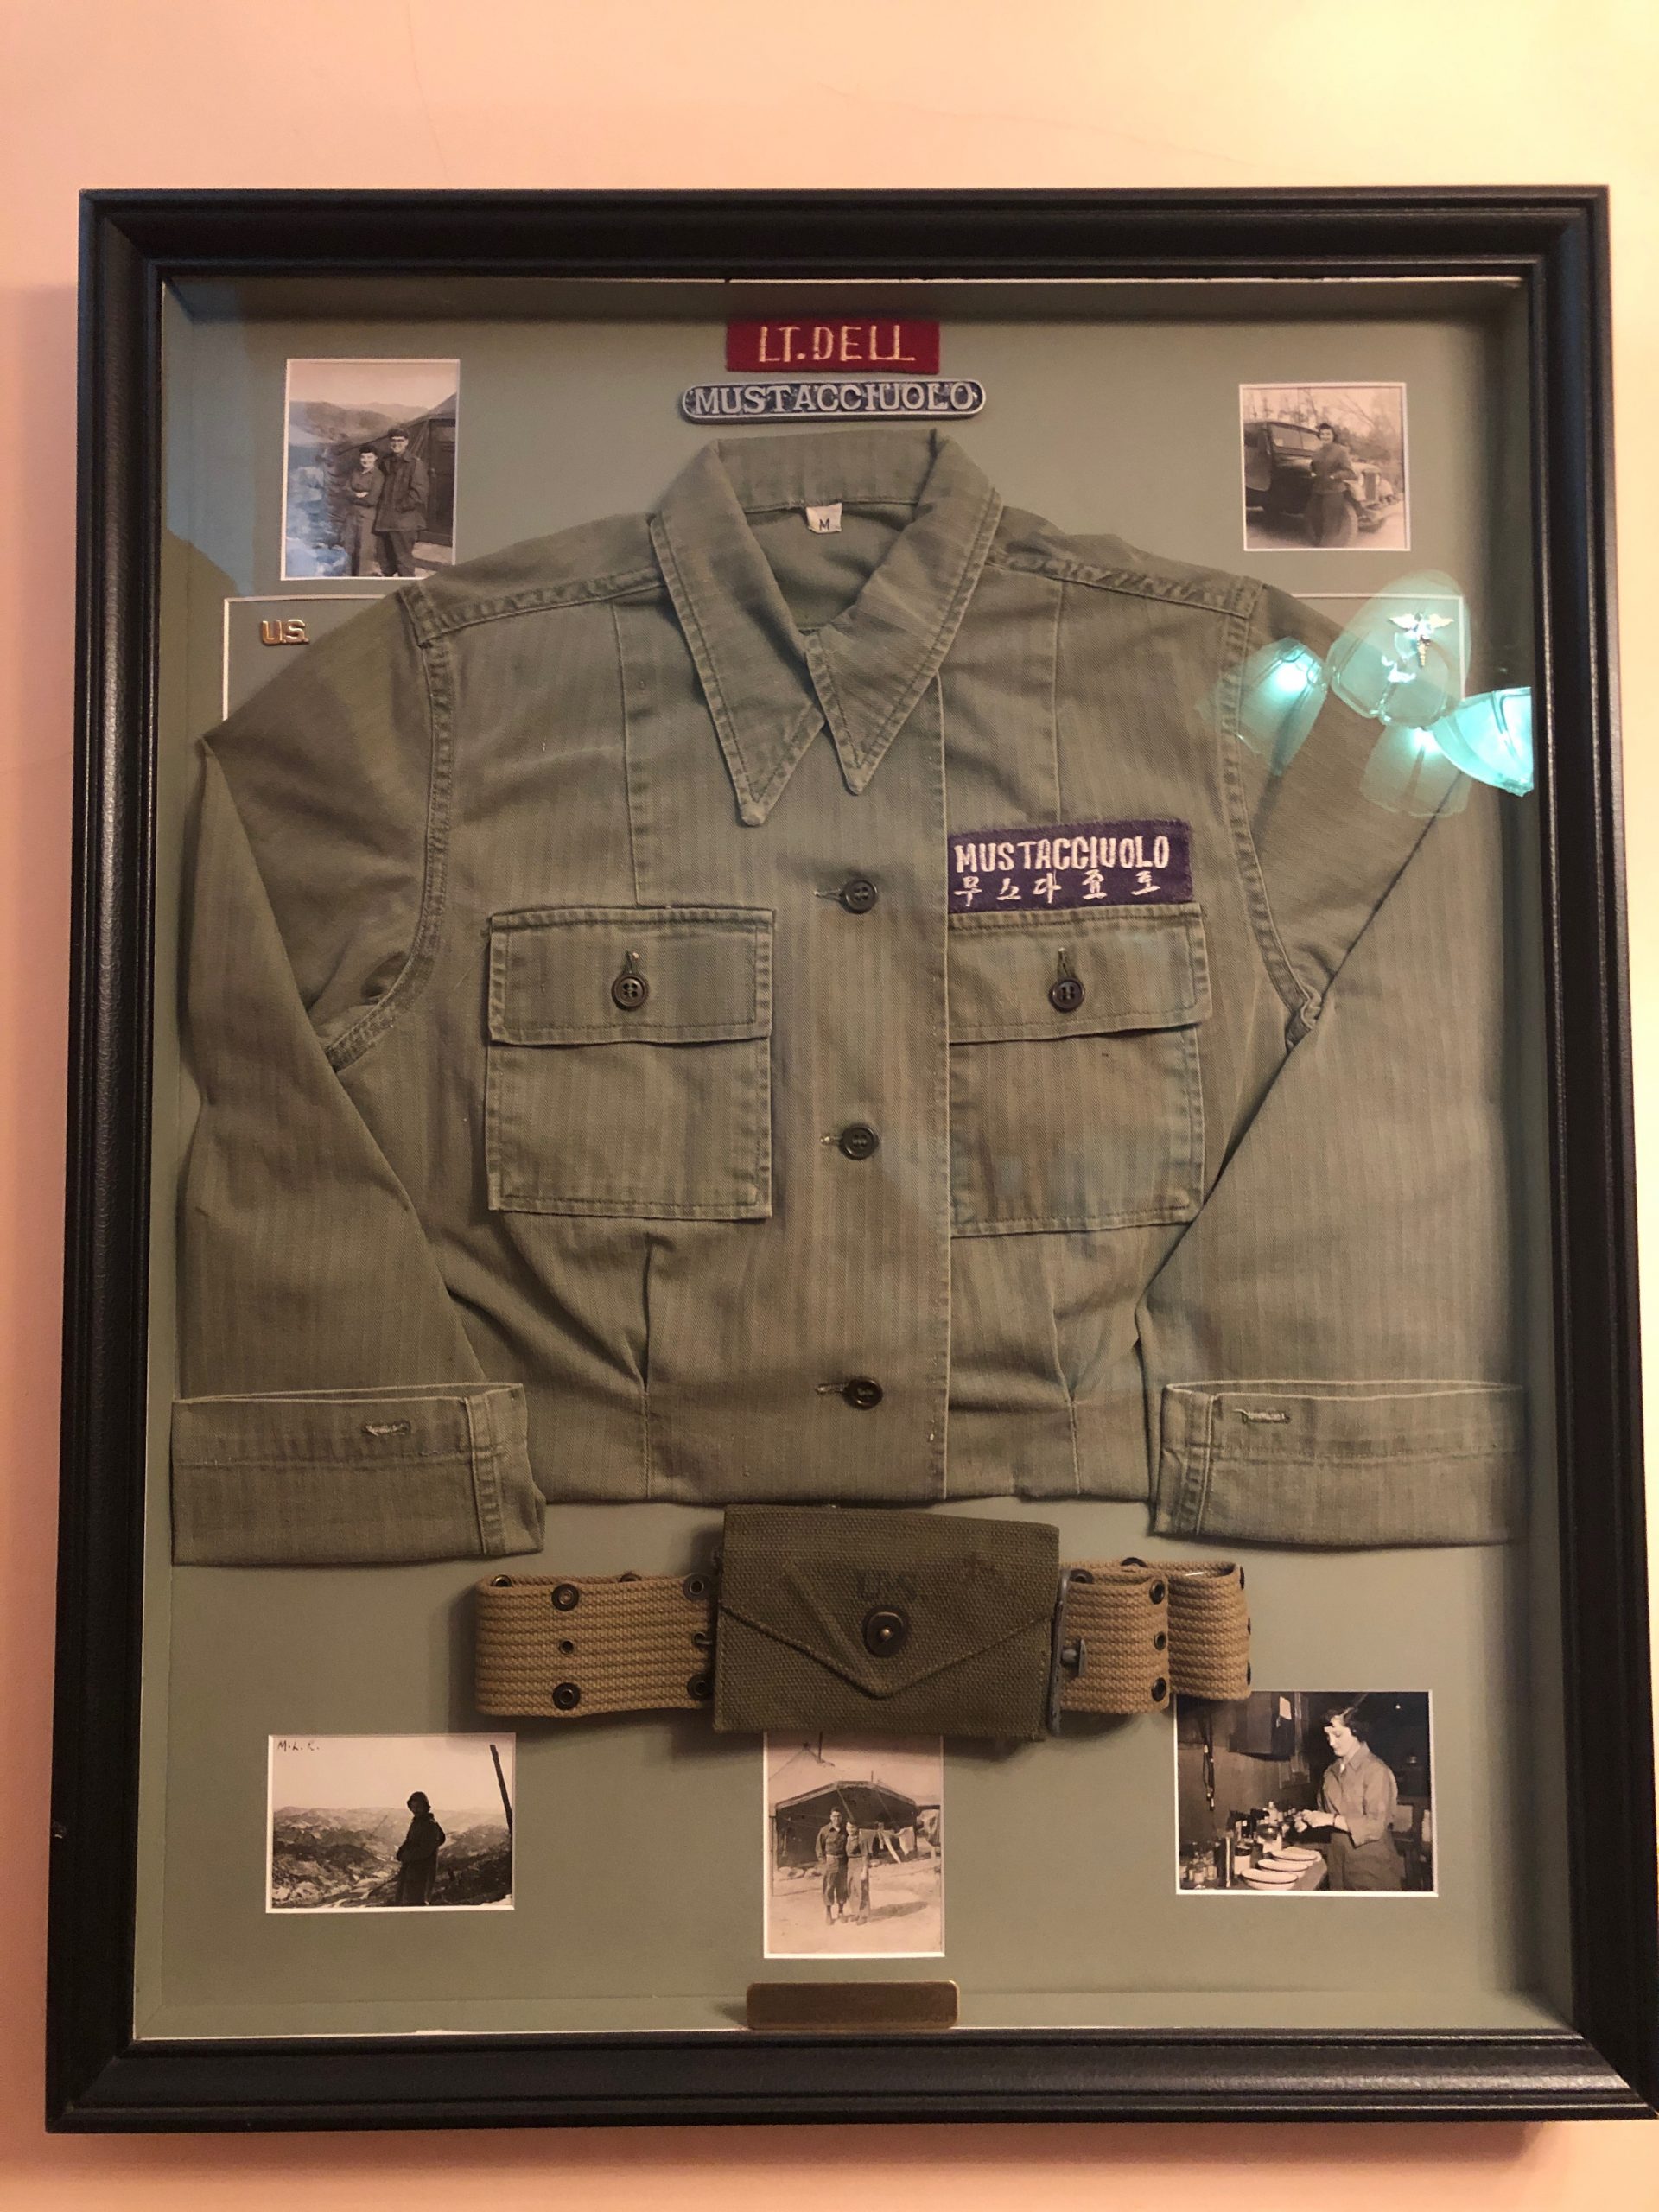 Della's military jacket and photos from her service during the Korean War